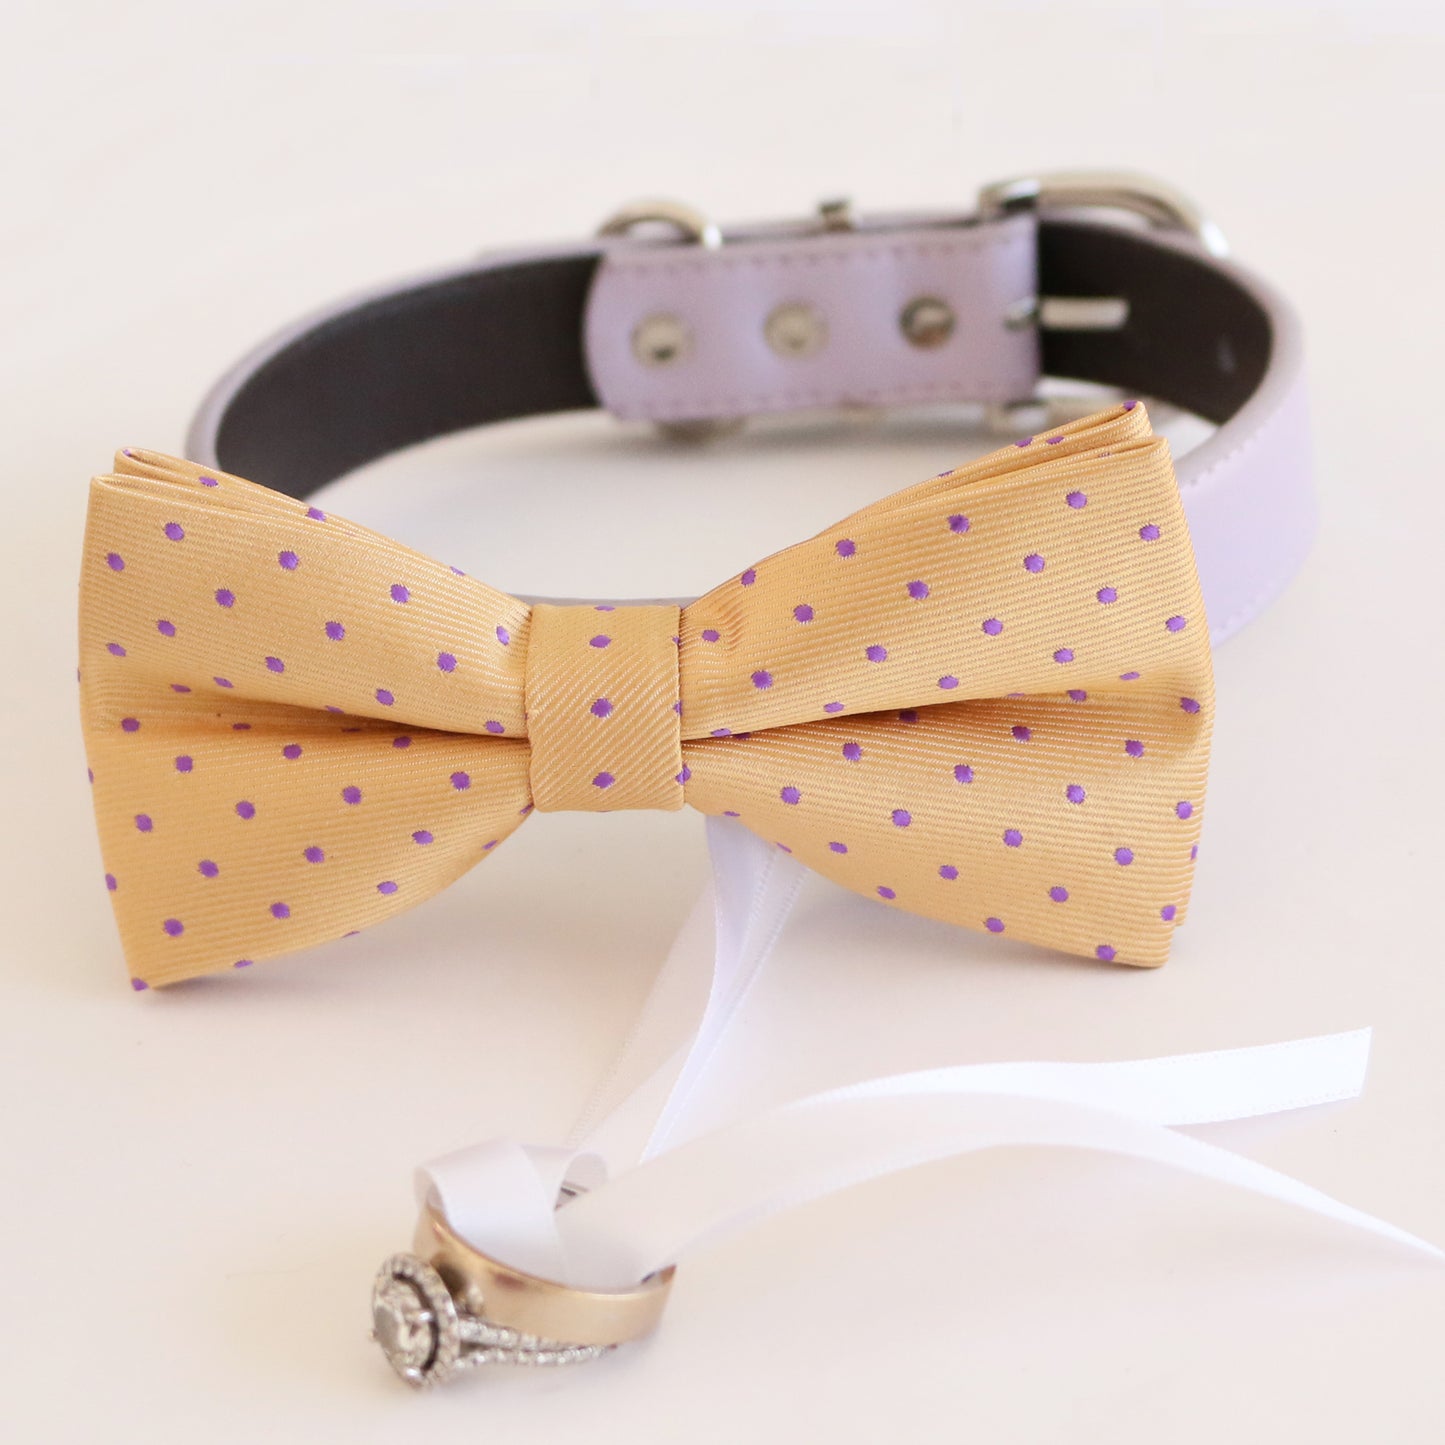 Cream lavender bow tie collar Leather collar Dog ring bearer ring bearer bow tie adjustable handmade XS to XXL collar and bow Proposal , Wedding dog collar